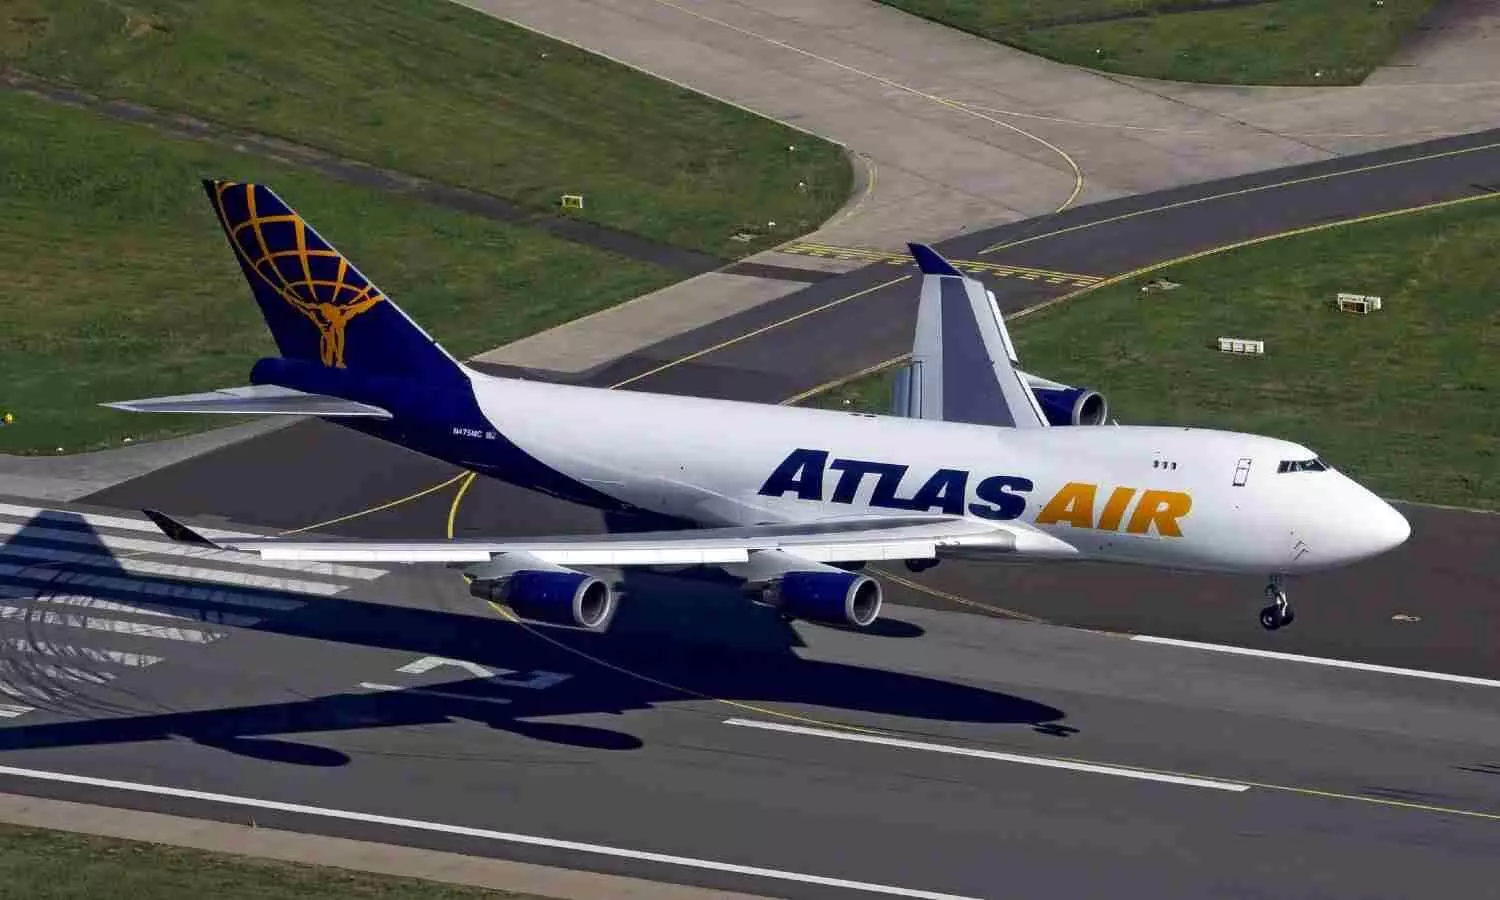 Atlas Air will operate a Boeing 747-400 freighter between China and the U.S. for SF